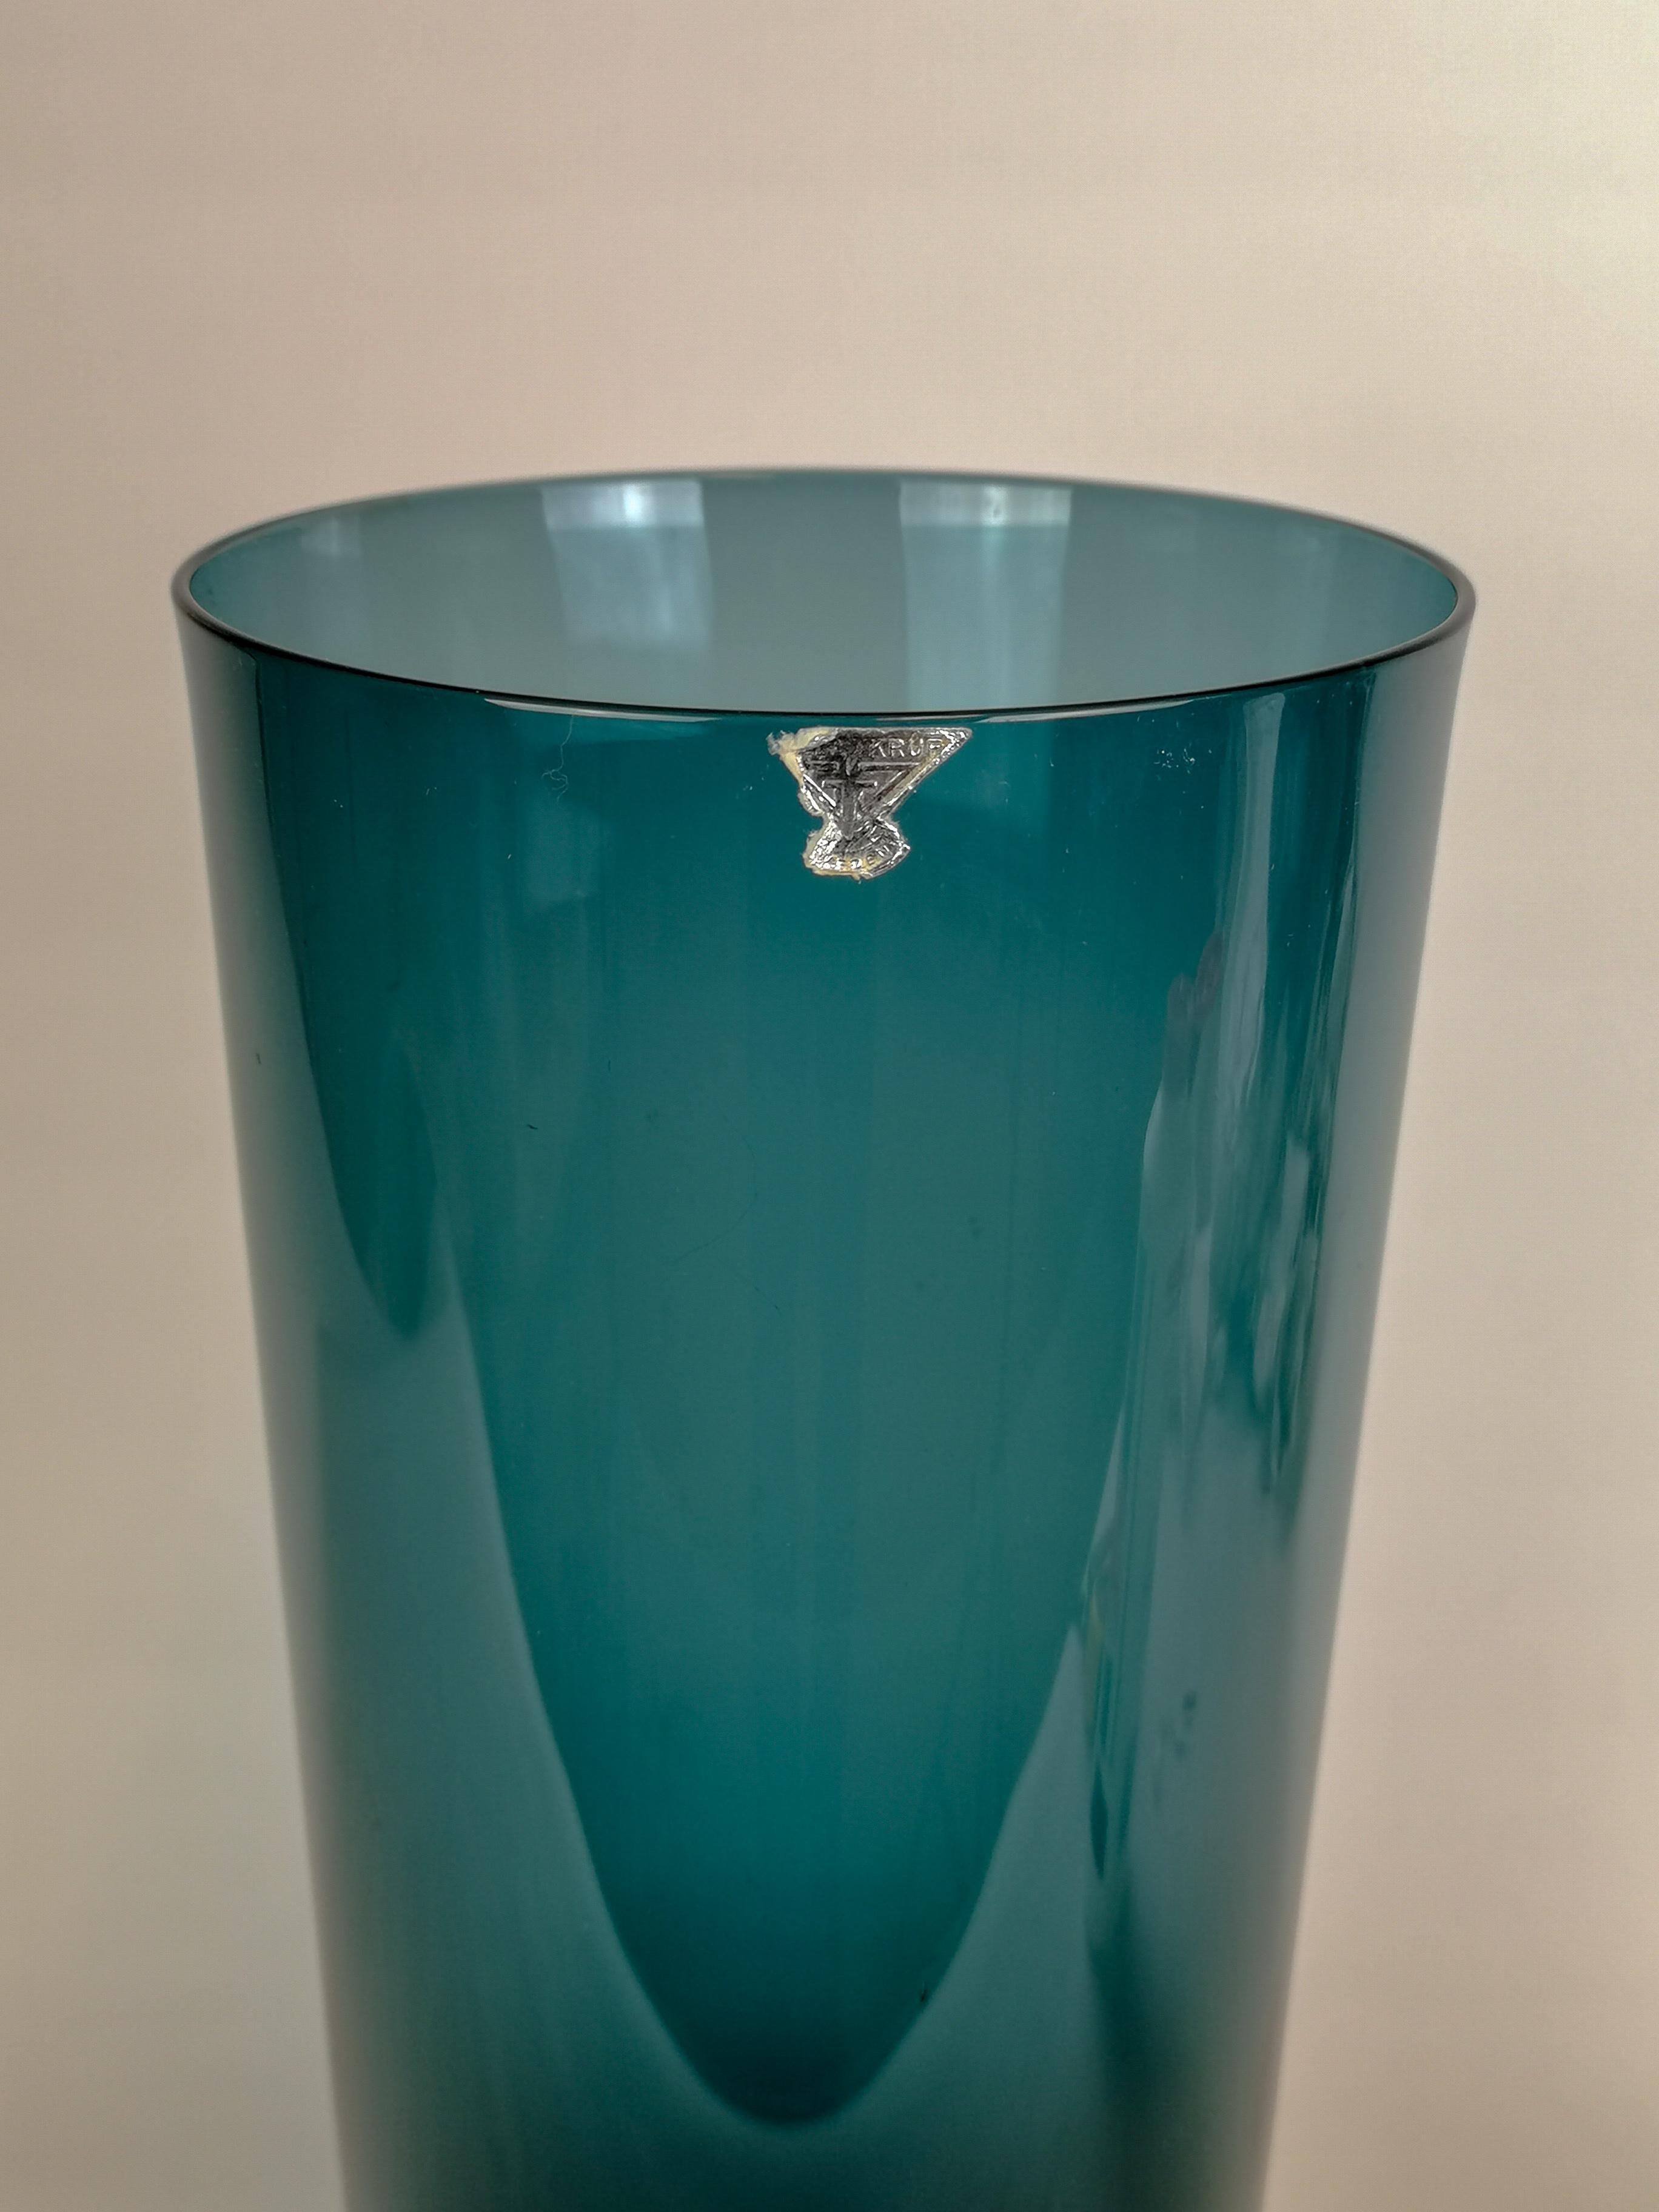 This wonderful large vase made in Sweden at GullaSkruf was designed by Kjell Blomberg in the 1950s.
It has a lovely color and as many of the designers from Sweden the light has a central part to give the glass piece that little bit of extra.